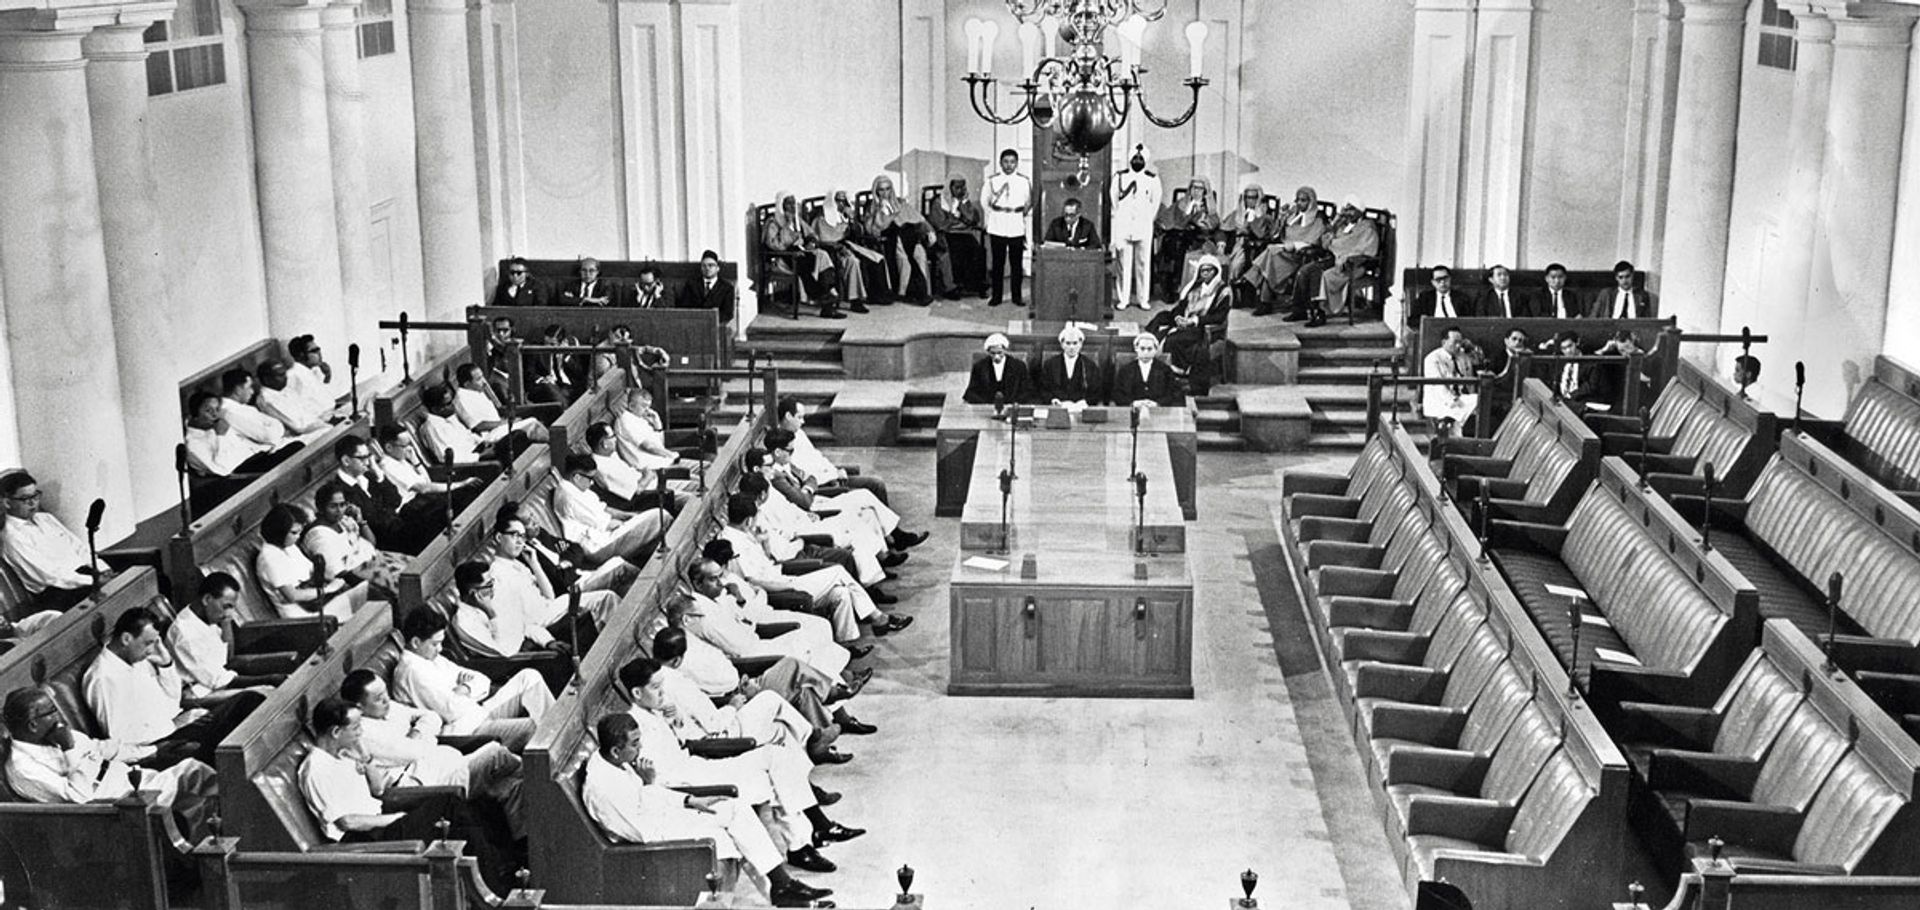 The first Parliament sitting for independent Singapore on Dec 8, 1965. It was boycotted by eight left-wing Barisan Sosialis MPs, who had broken away from the People’s Action Party in 1961 in protest against Singapore’s split from Malaysia. They failed to win public support and all Barisan MPs eventually resigned. This was to give the PAP total control of Parliament until Mr J.B. Jeyaretnam of the Workers’ Party entered Parliament in 1981 as an MP for Anson constituency. Source: The Straits Times